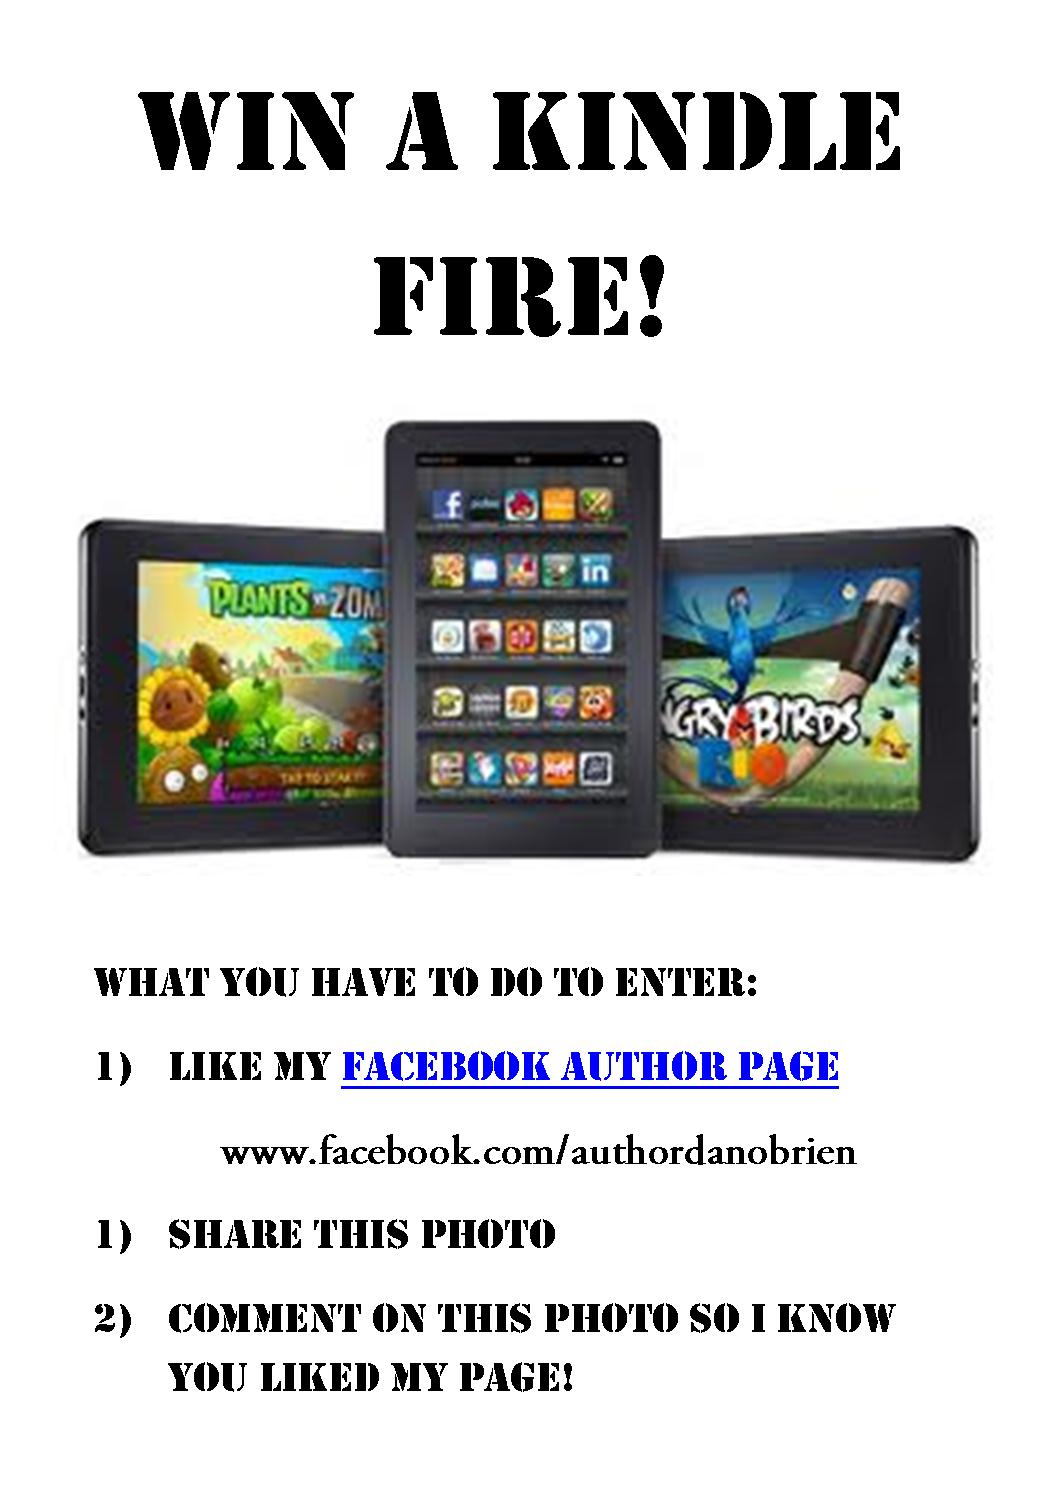 am running a giveaway on my author page onto win a Kindle Fire.